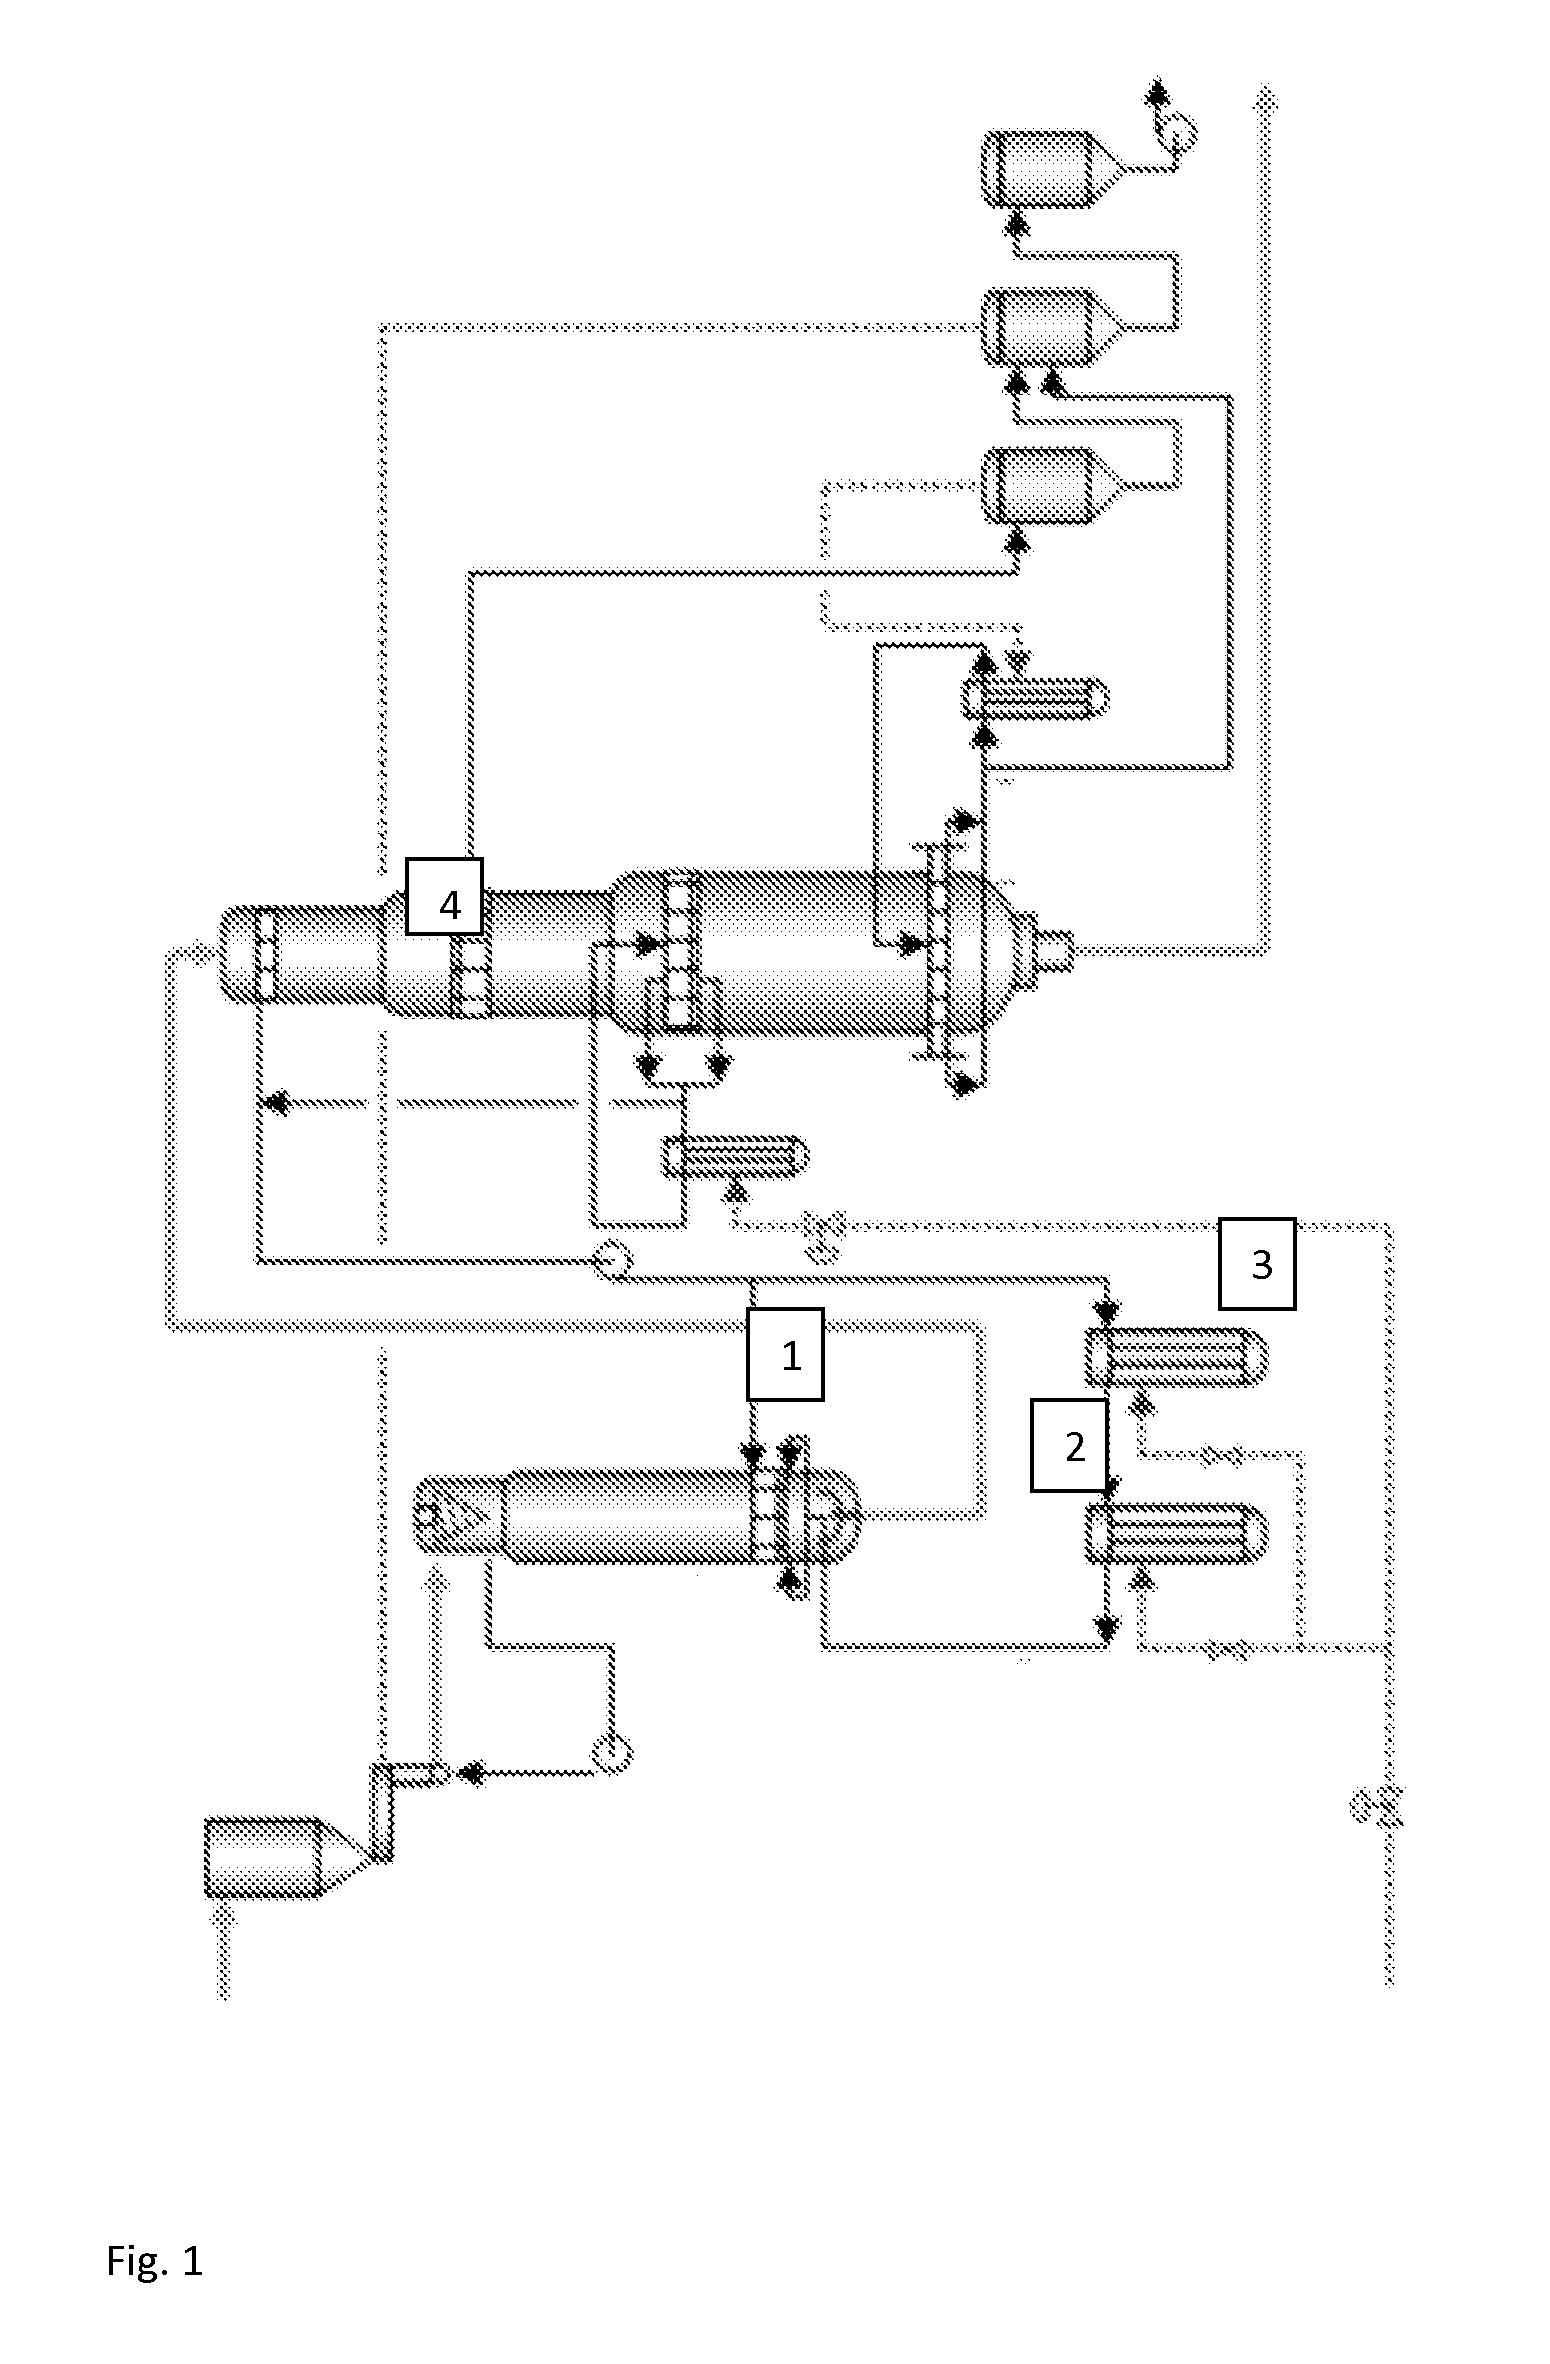 Method of processing chemical pulp